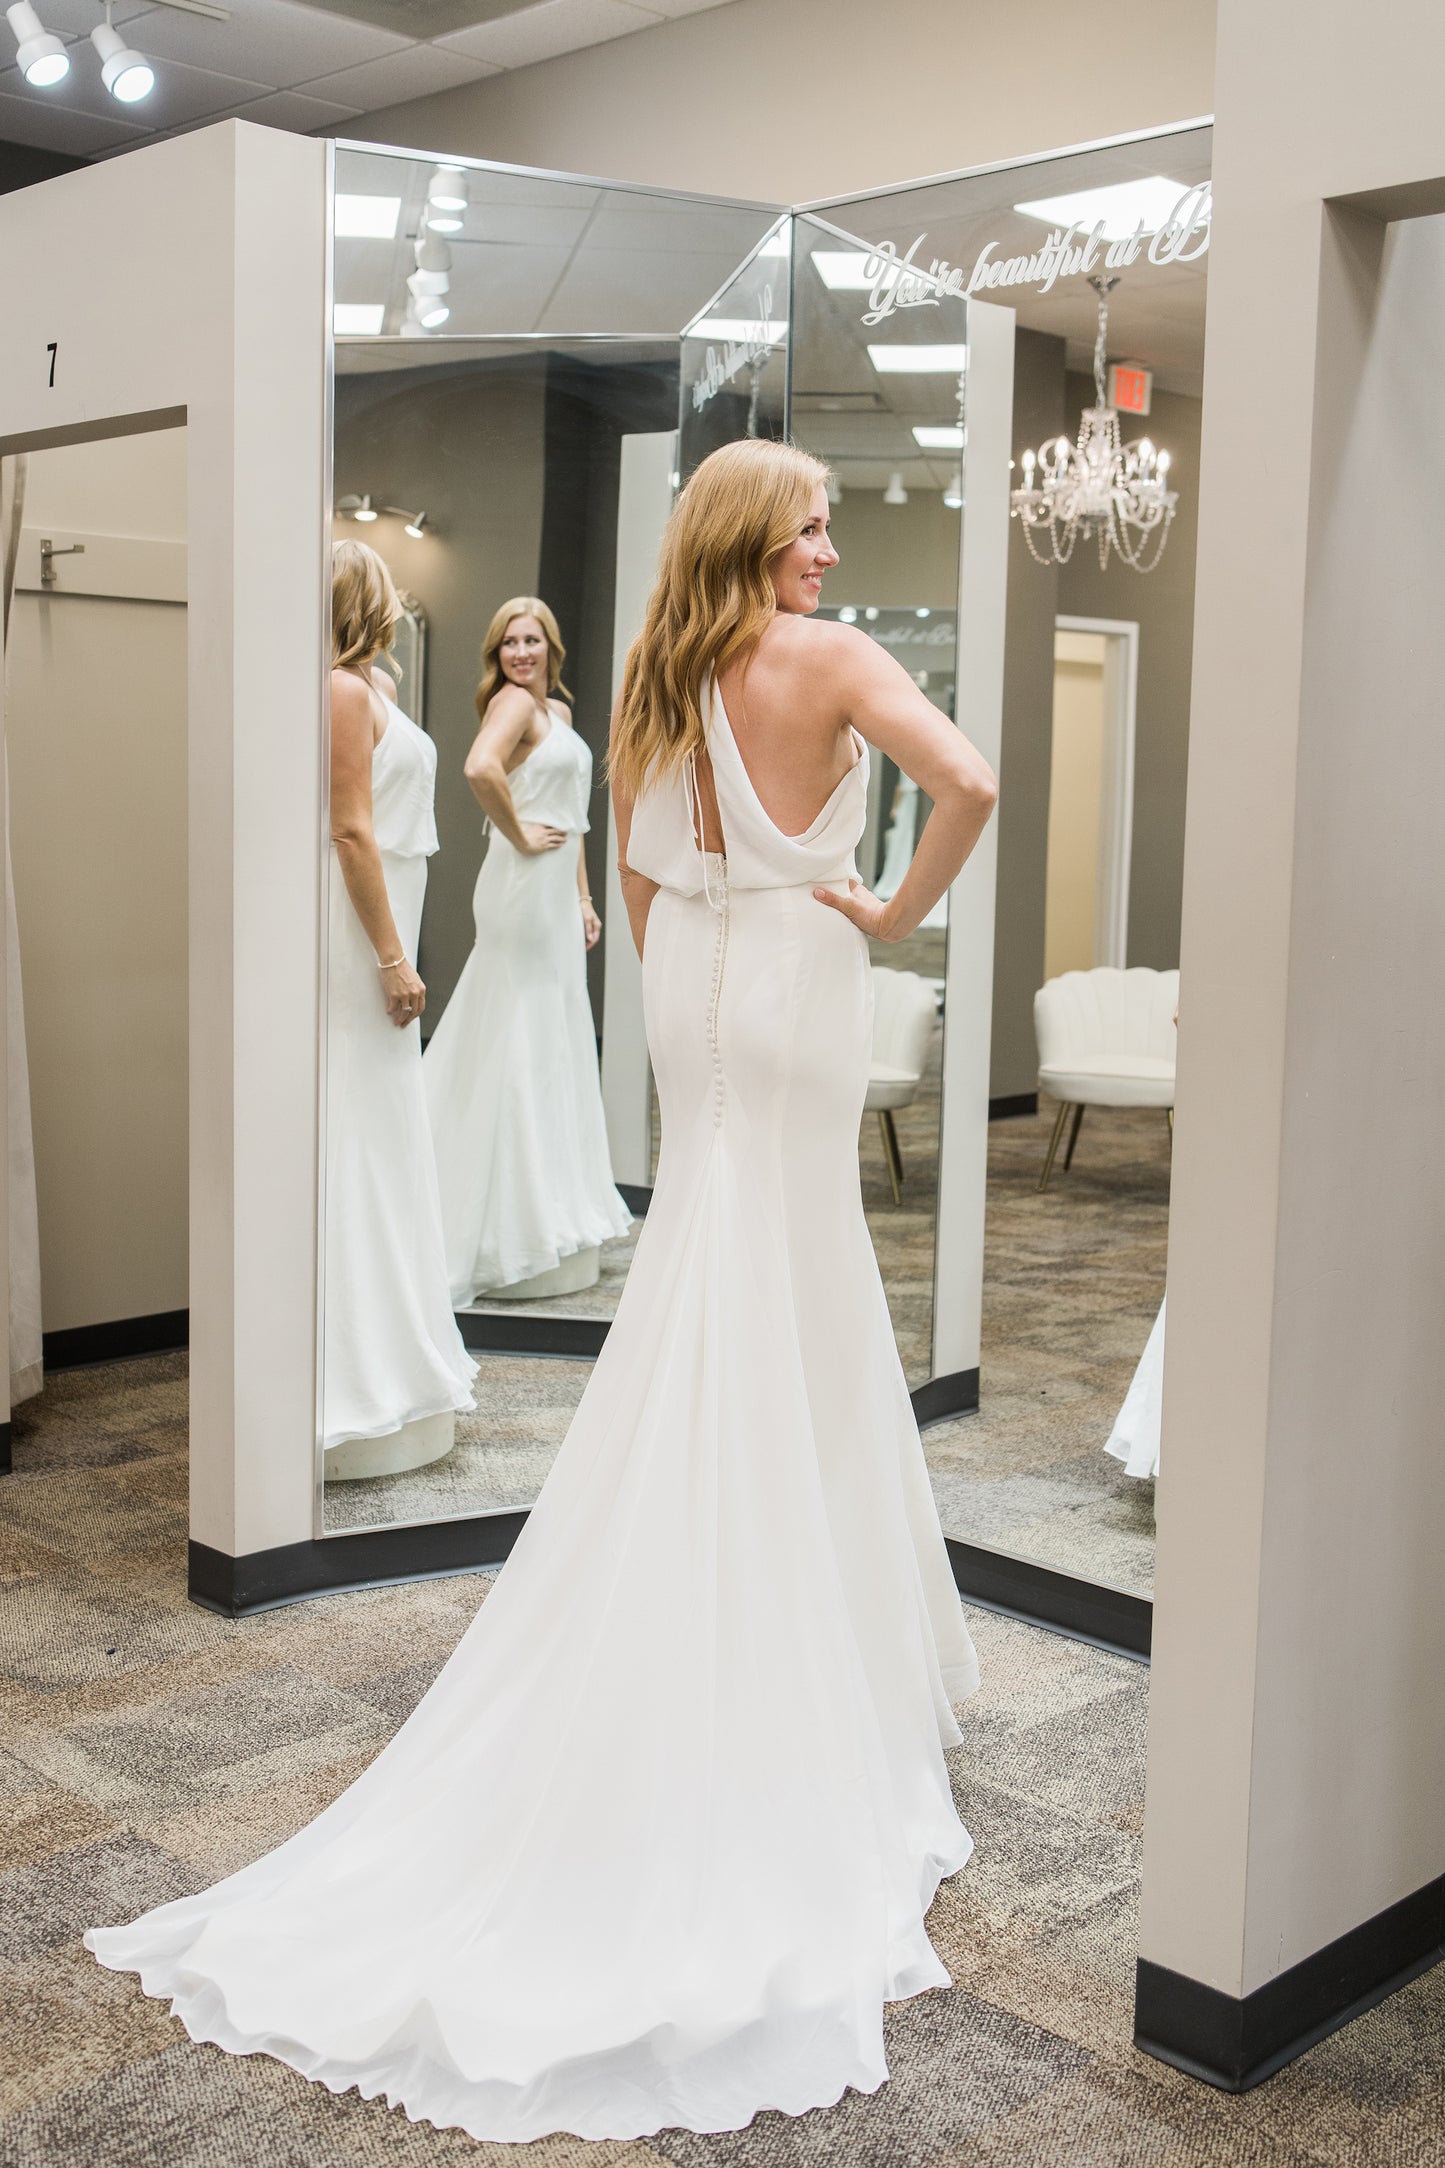 FINAL SALE: Chiffon Gown with a Halter Neckline and Cowl Back